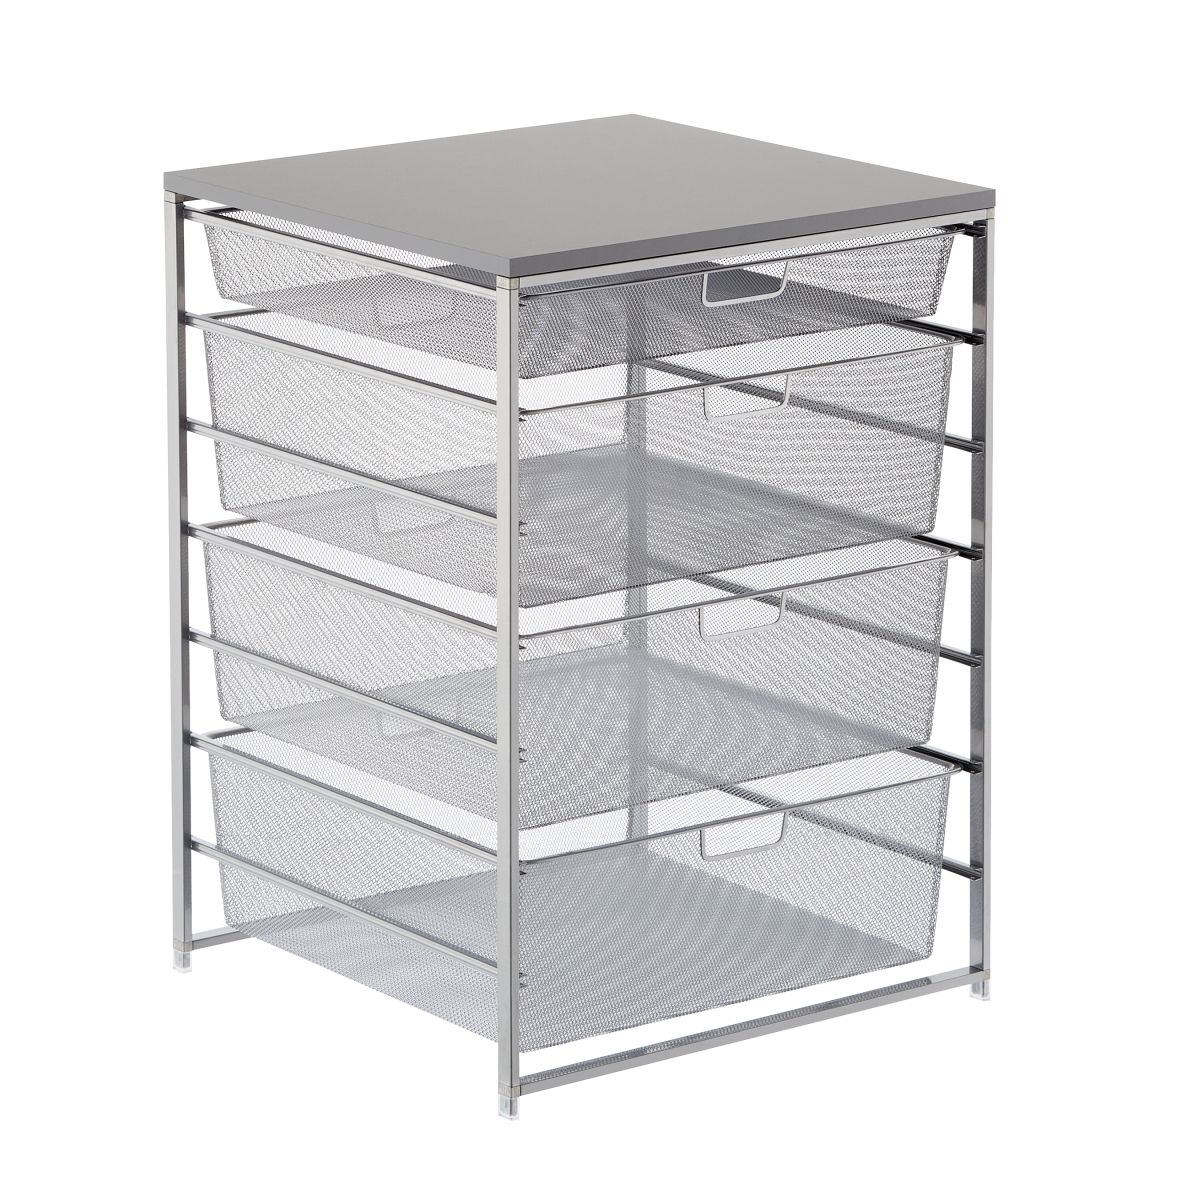 Elfa Classic Wide Mesh Drawers Platinum & Grey | The Container Store